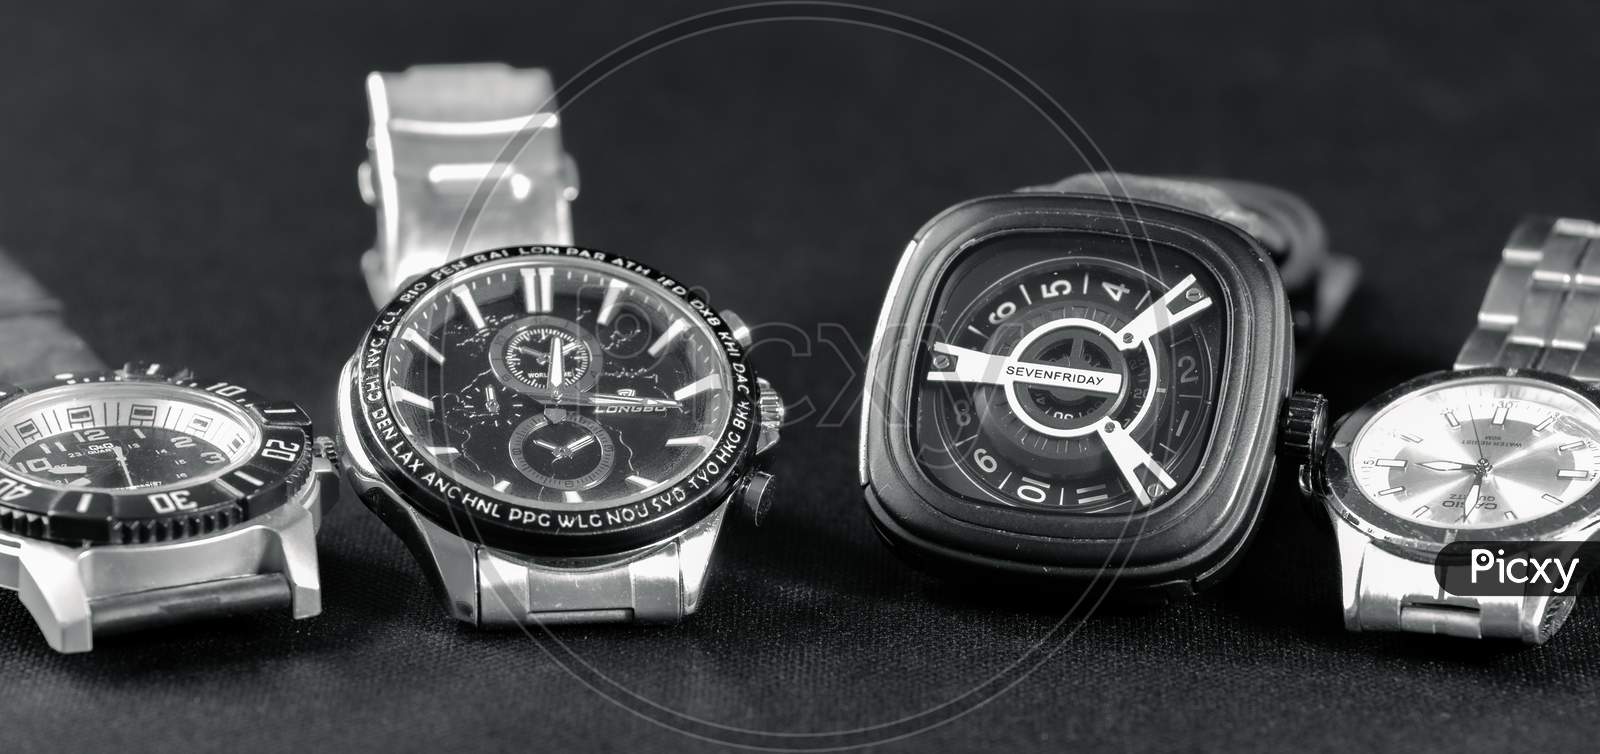 Four Watches Lined In A Dark Grey Surface.